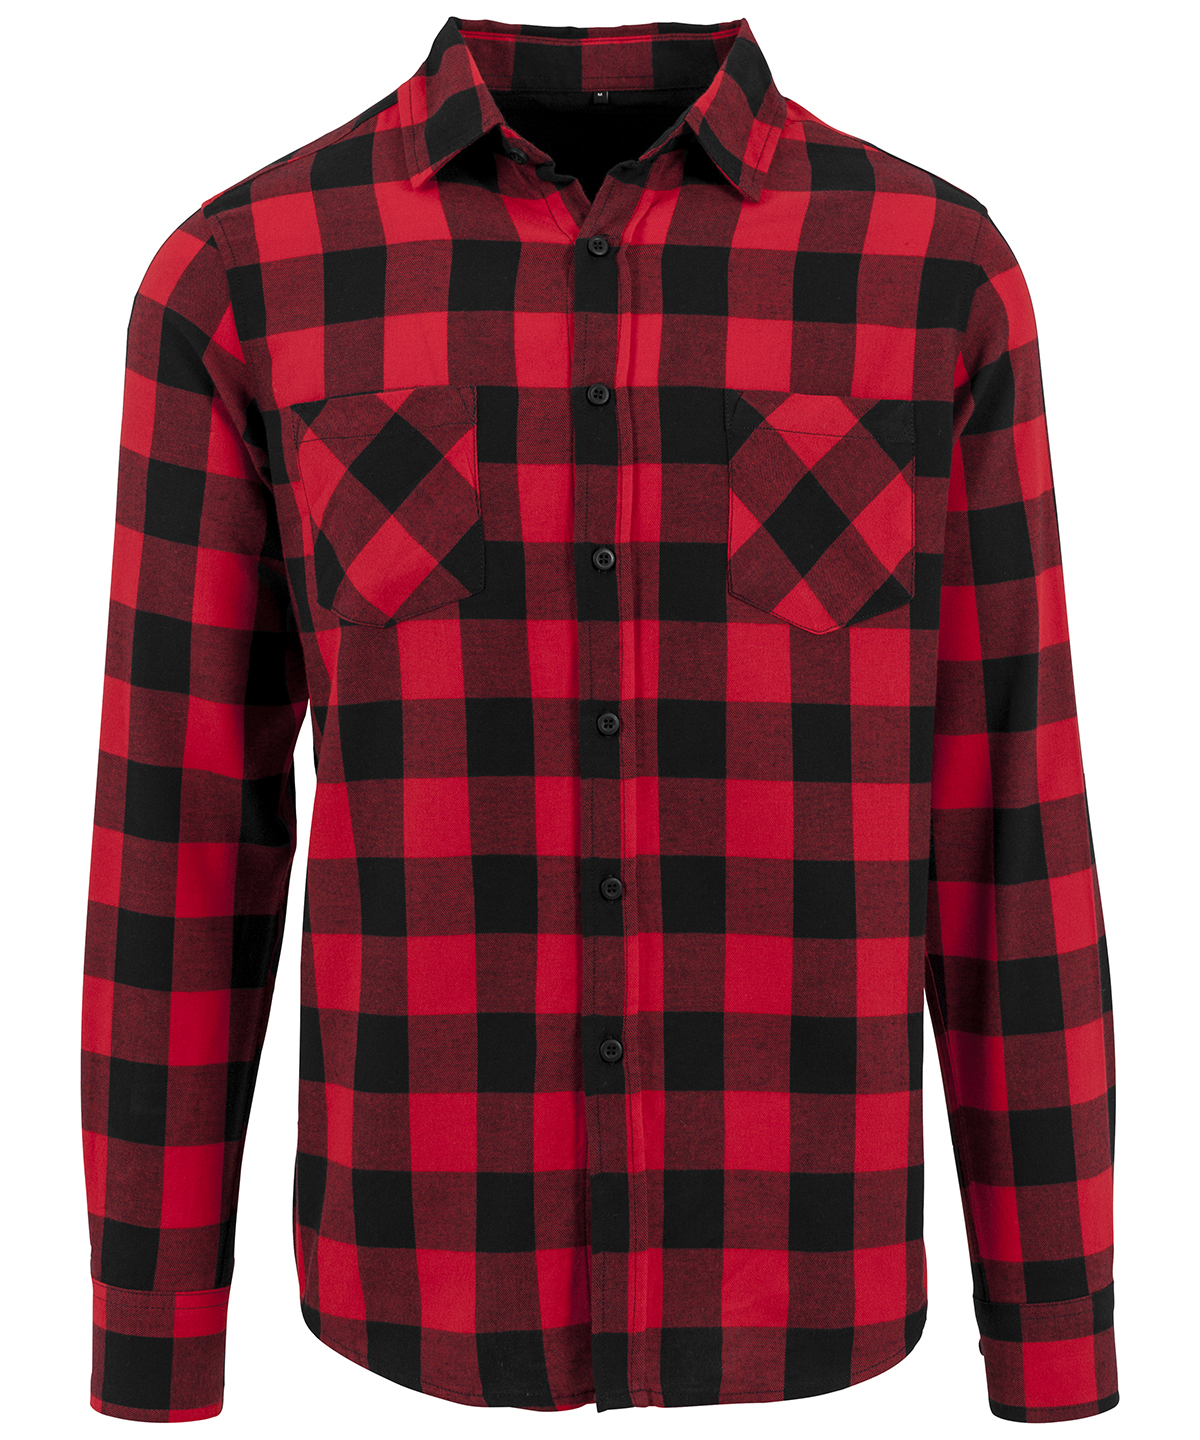 Checked Flannel Shirt Black/Red Size 2XLarge